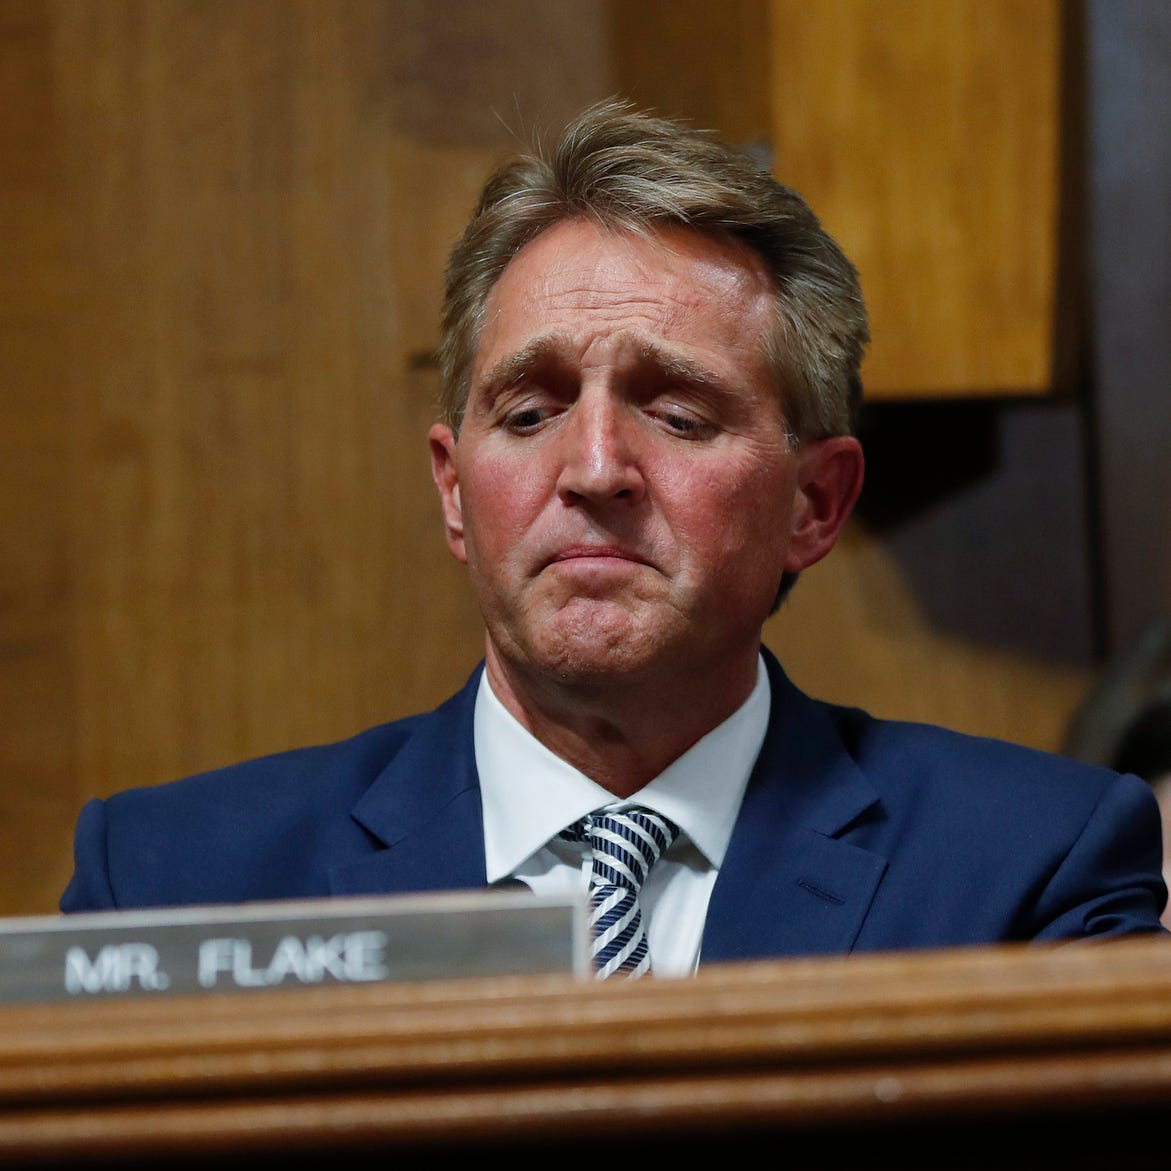 After a flurry of last-minute negotiations, the Senate Judiciary Committee advanced Brett Kavanaugh's nomination for the Supreme Court after agreeing to a late call from Sen. Flake, seated here, for a one week investigation into sexual assault allega